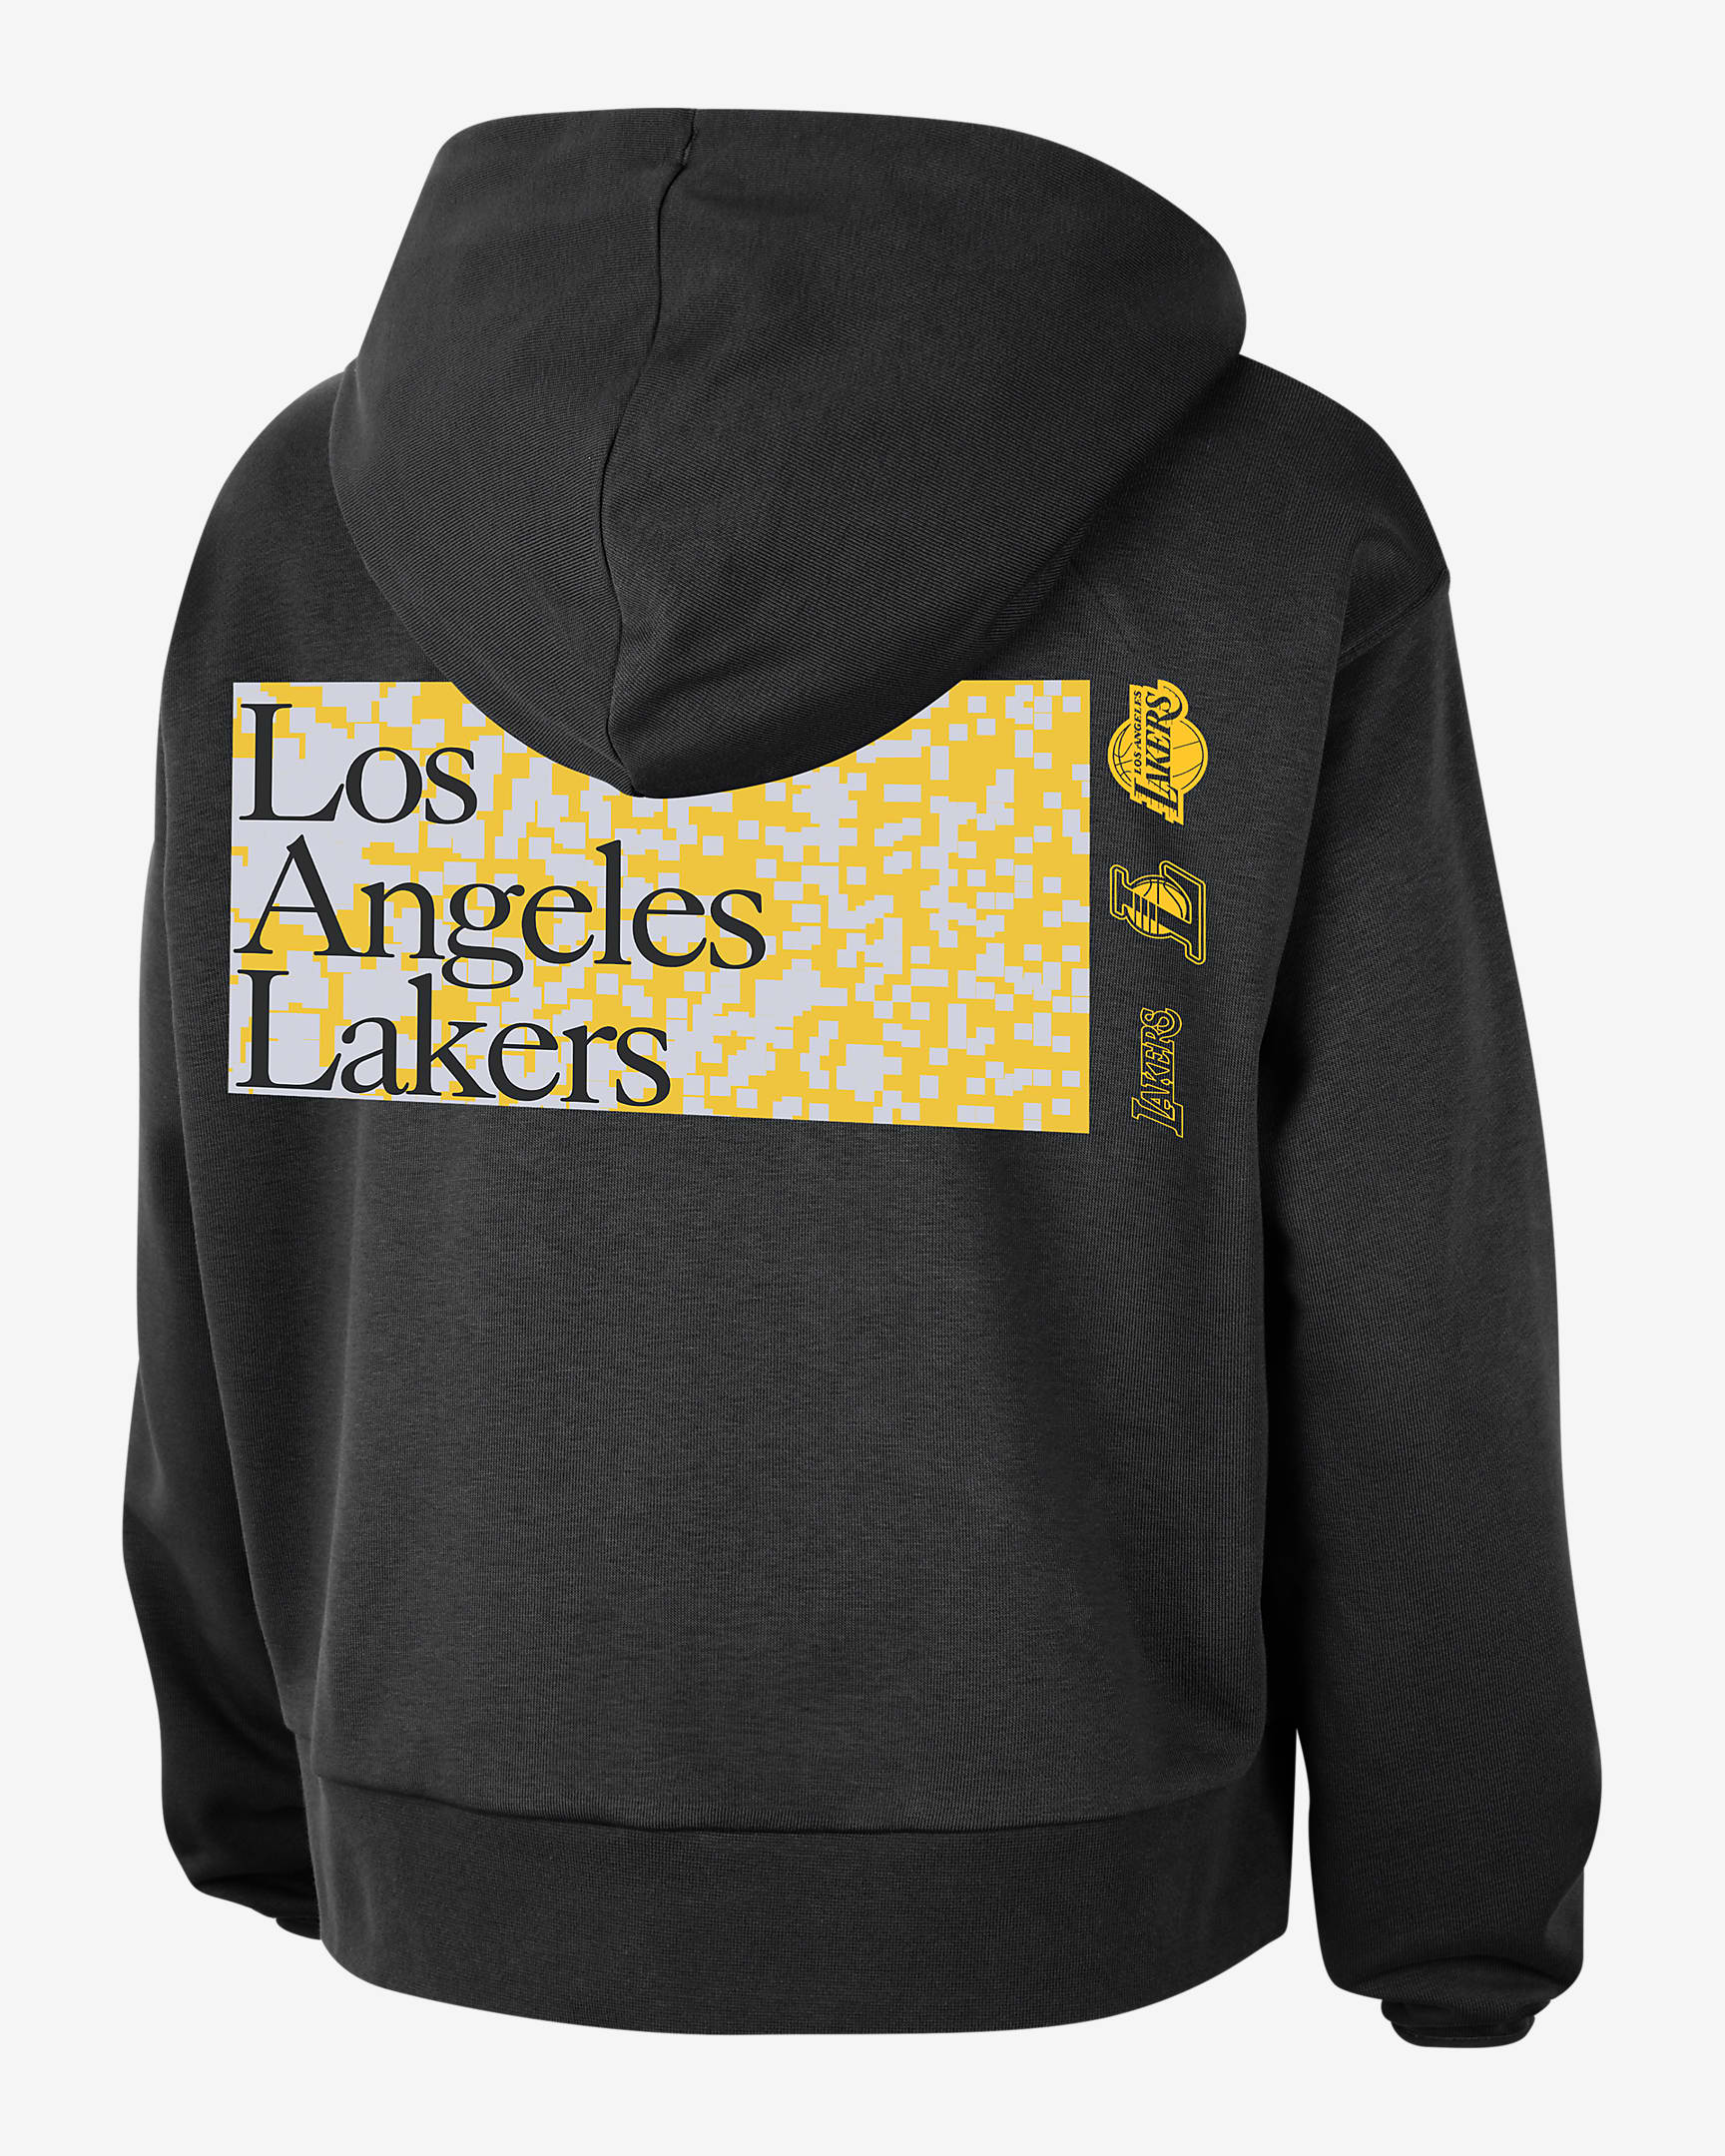 Los Angeles Lakers Standard Issue Women's Nike DriFIT NBA Pullover